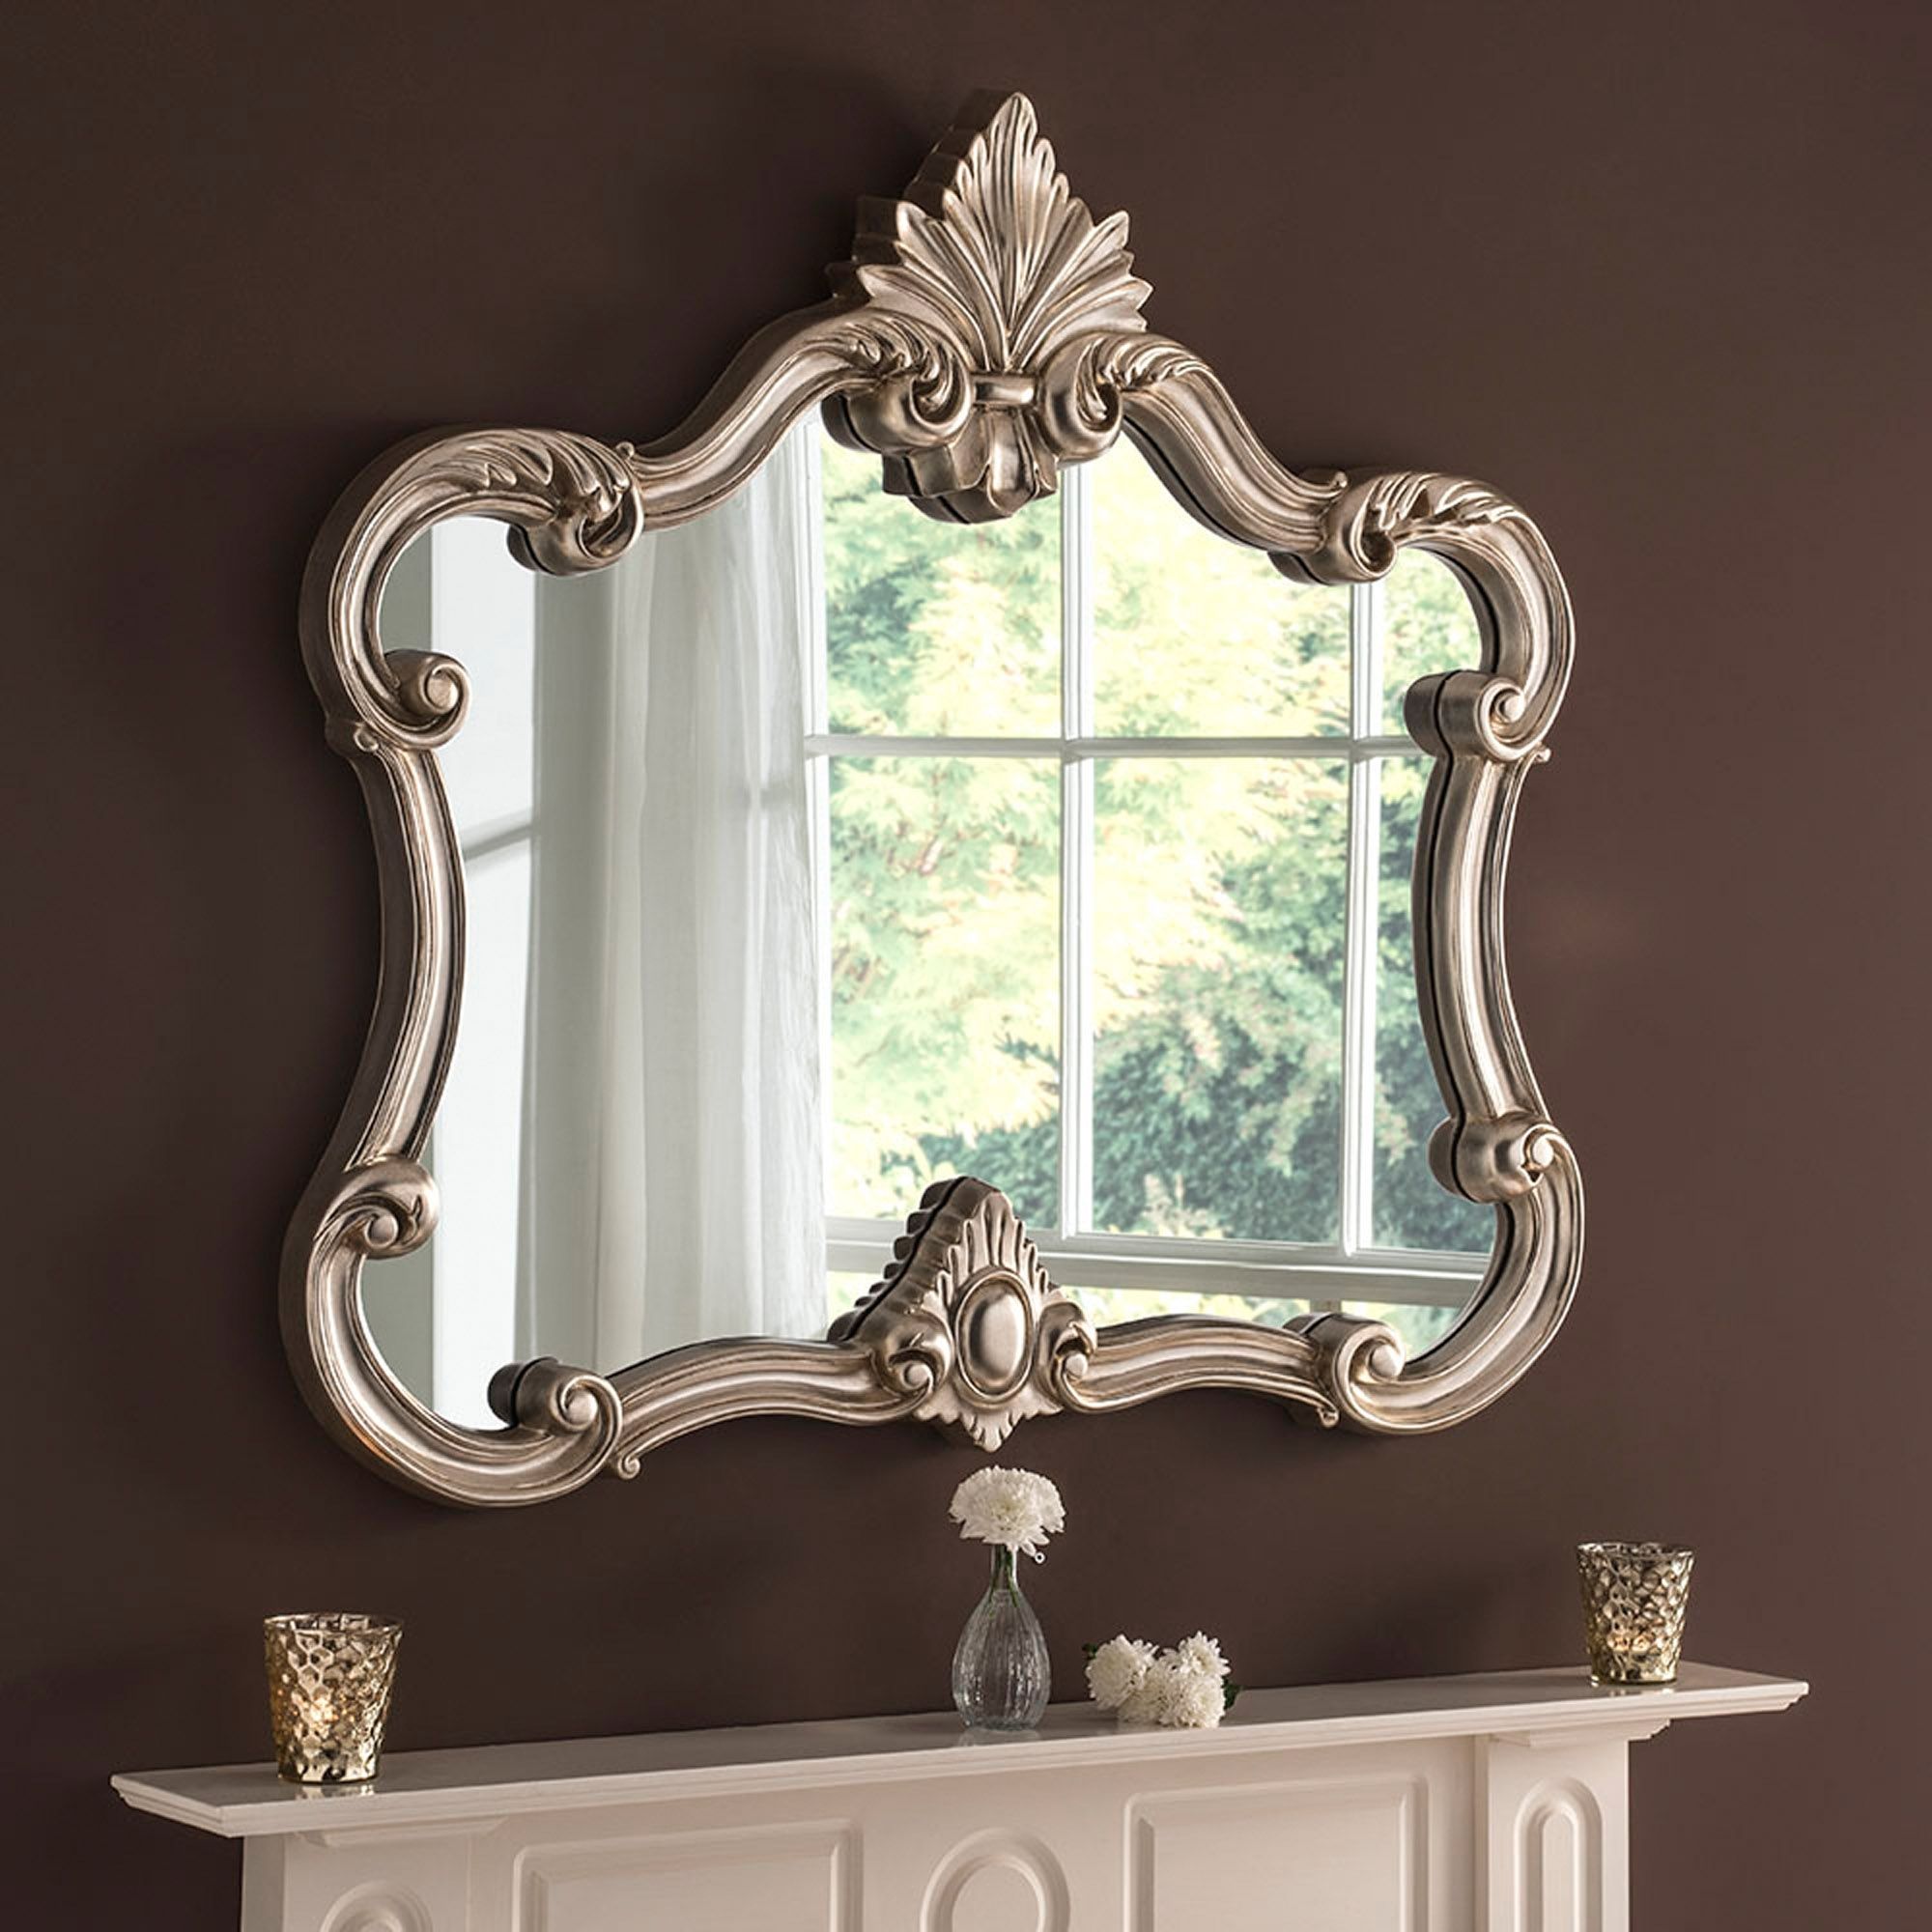 Antique French Style Silver Decorative Mirror With Booth Reclaimed Wall Mirrors Accent (View 2 of 15)